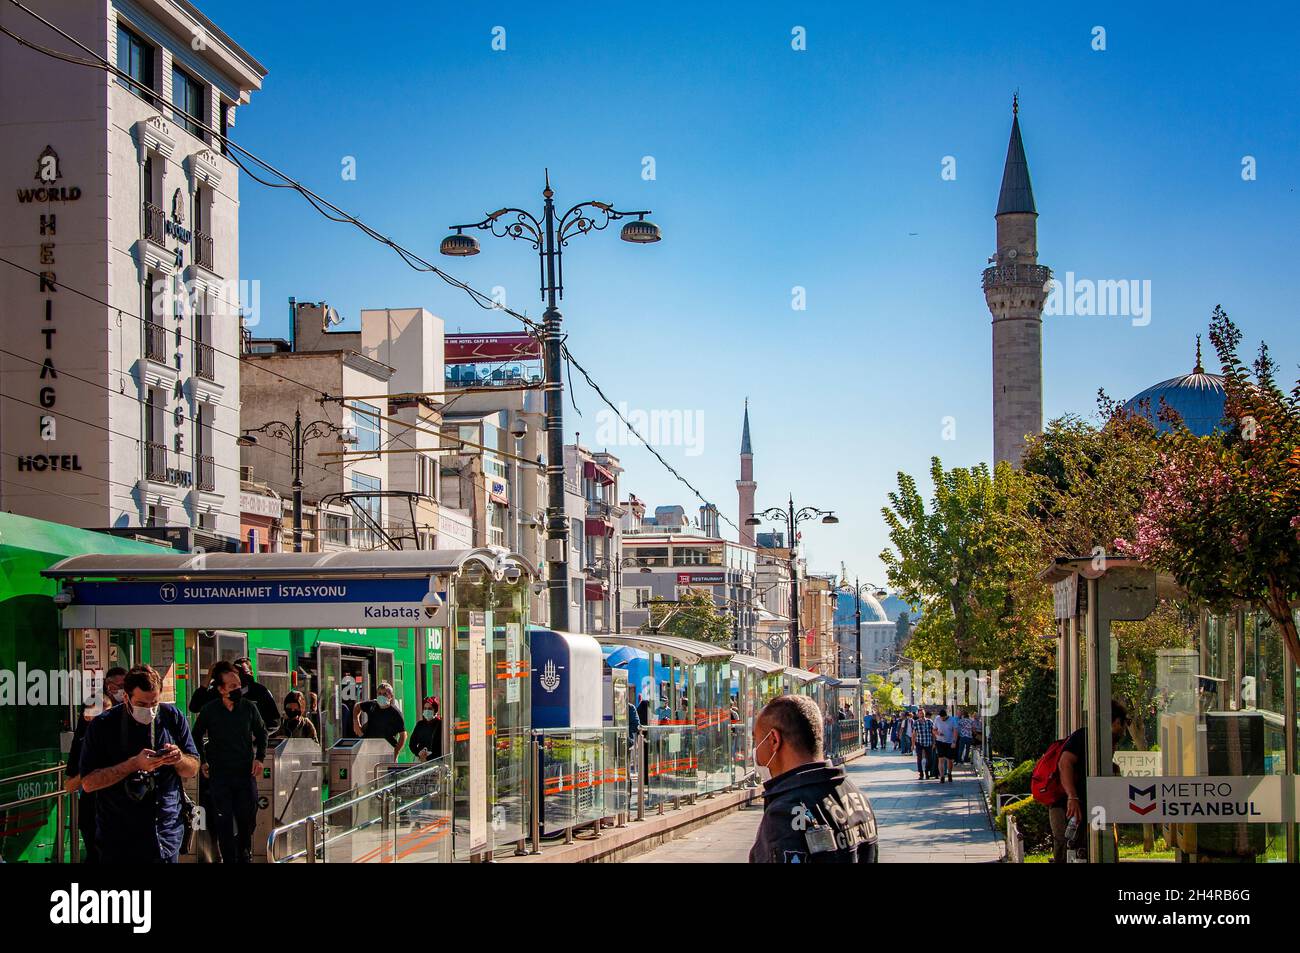 ISTANBUL, TURKEY. SEPTEMBER 26, 2021. Street view of the city, small shops and cafes, mosque's tower on the background, daylight Stock Photo